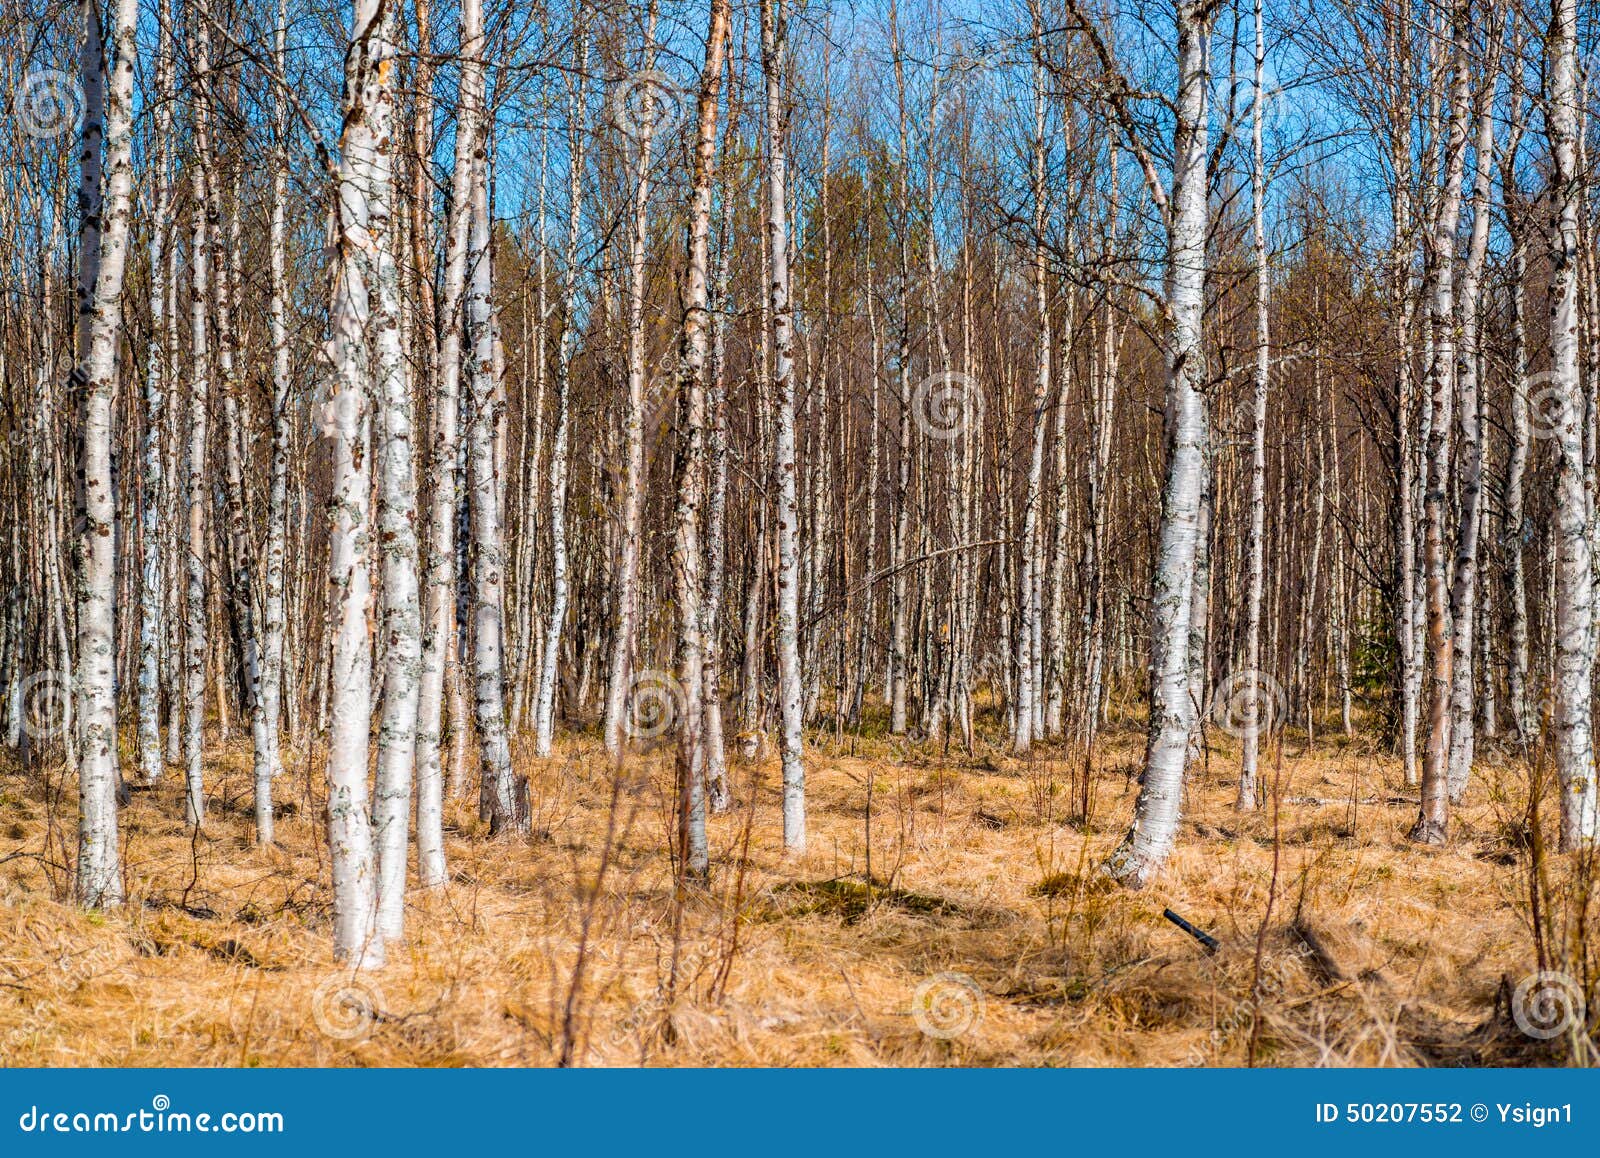 Many Birch Trees without Leaves in Spring Stock Photo - Image of ...